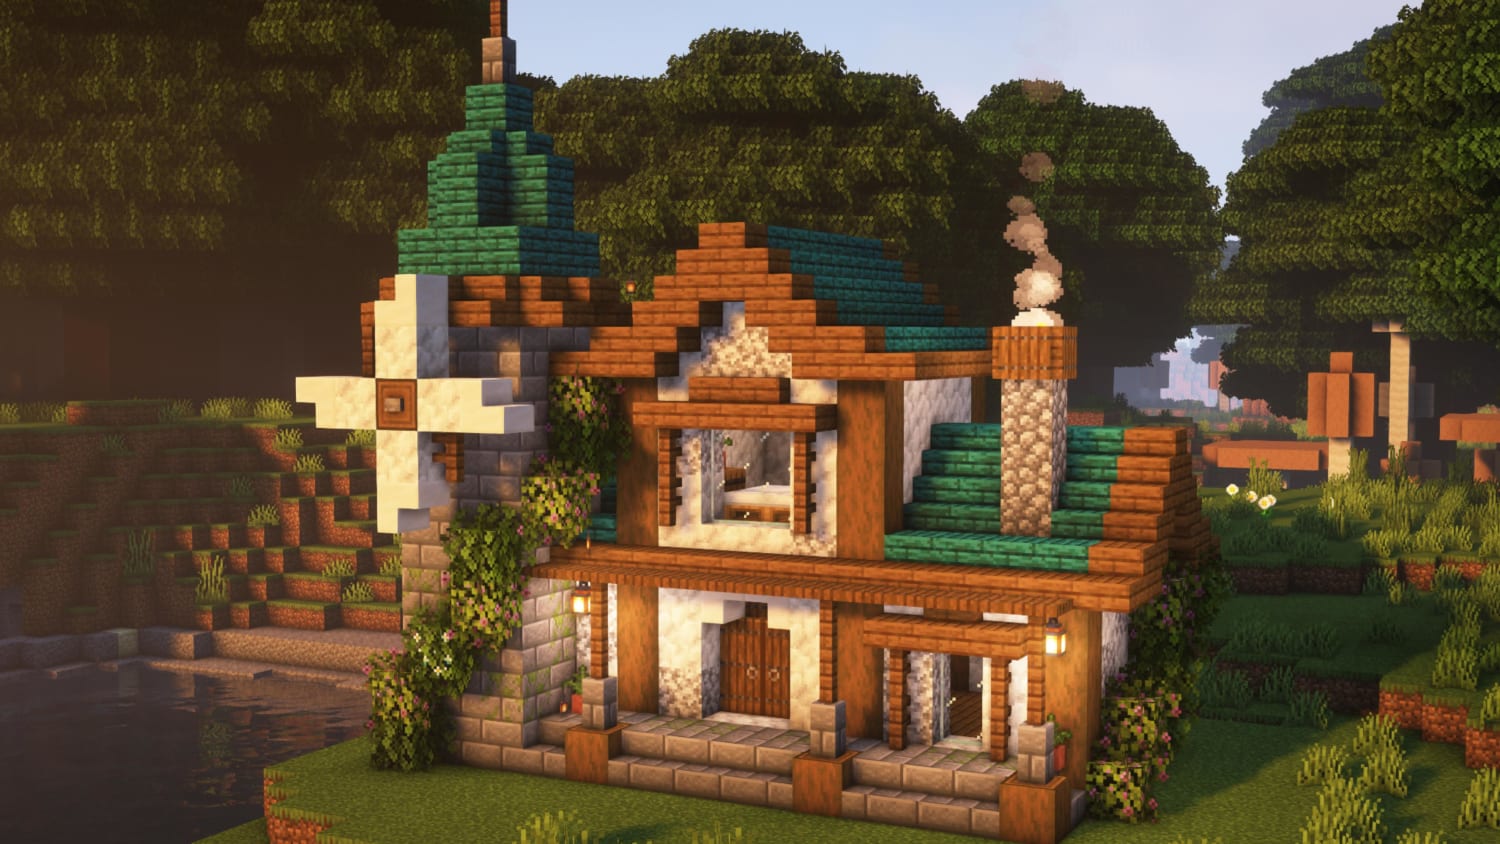 Built this windmill house